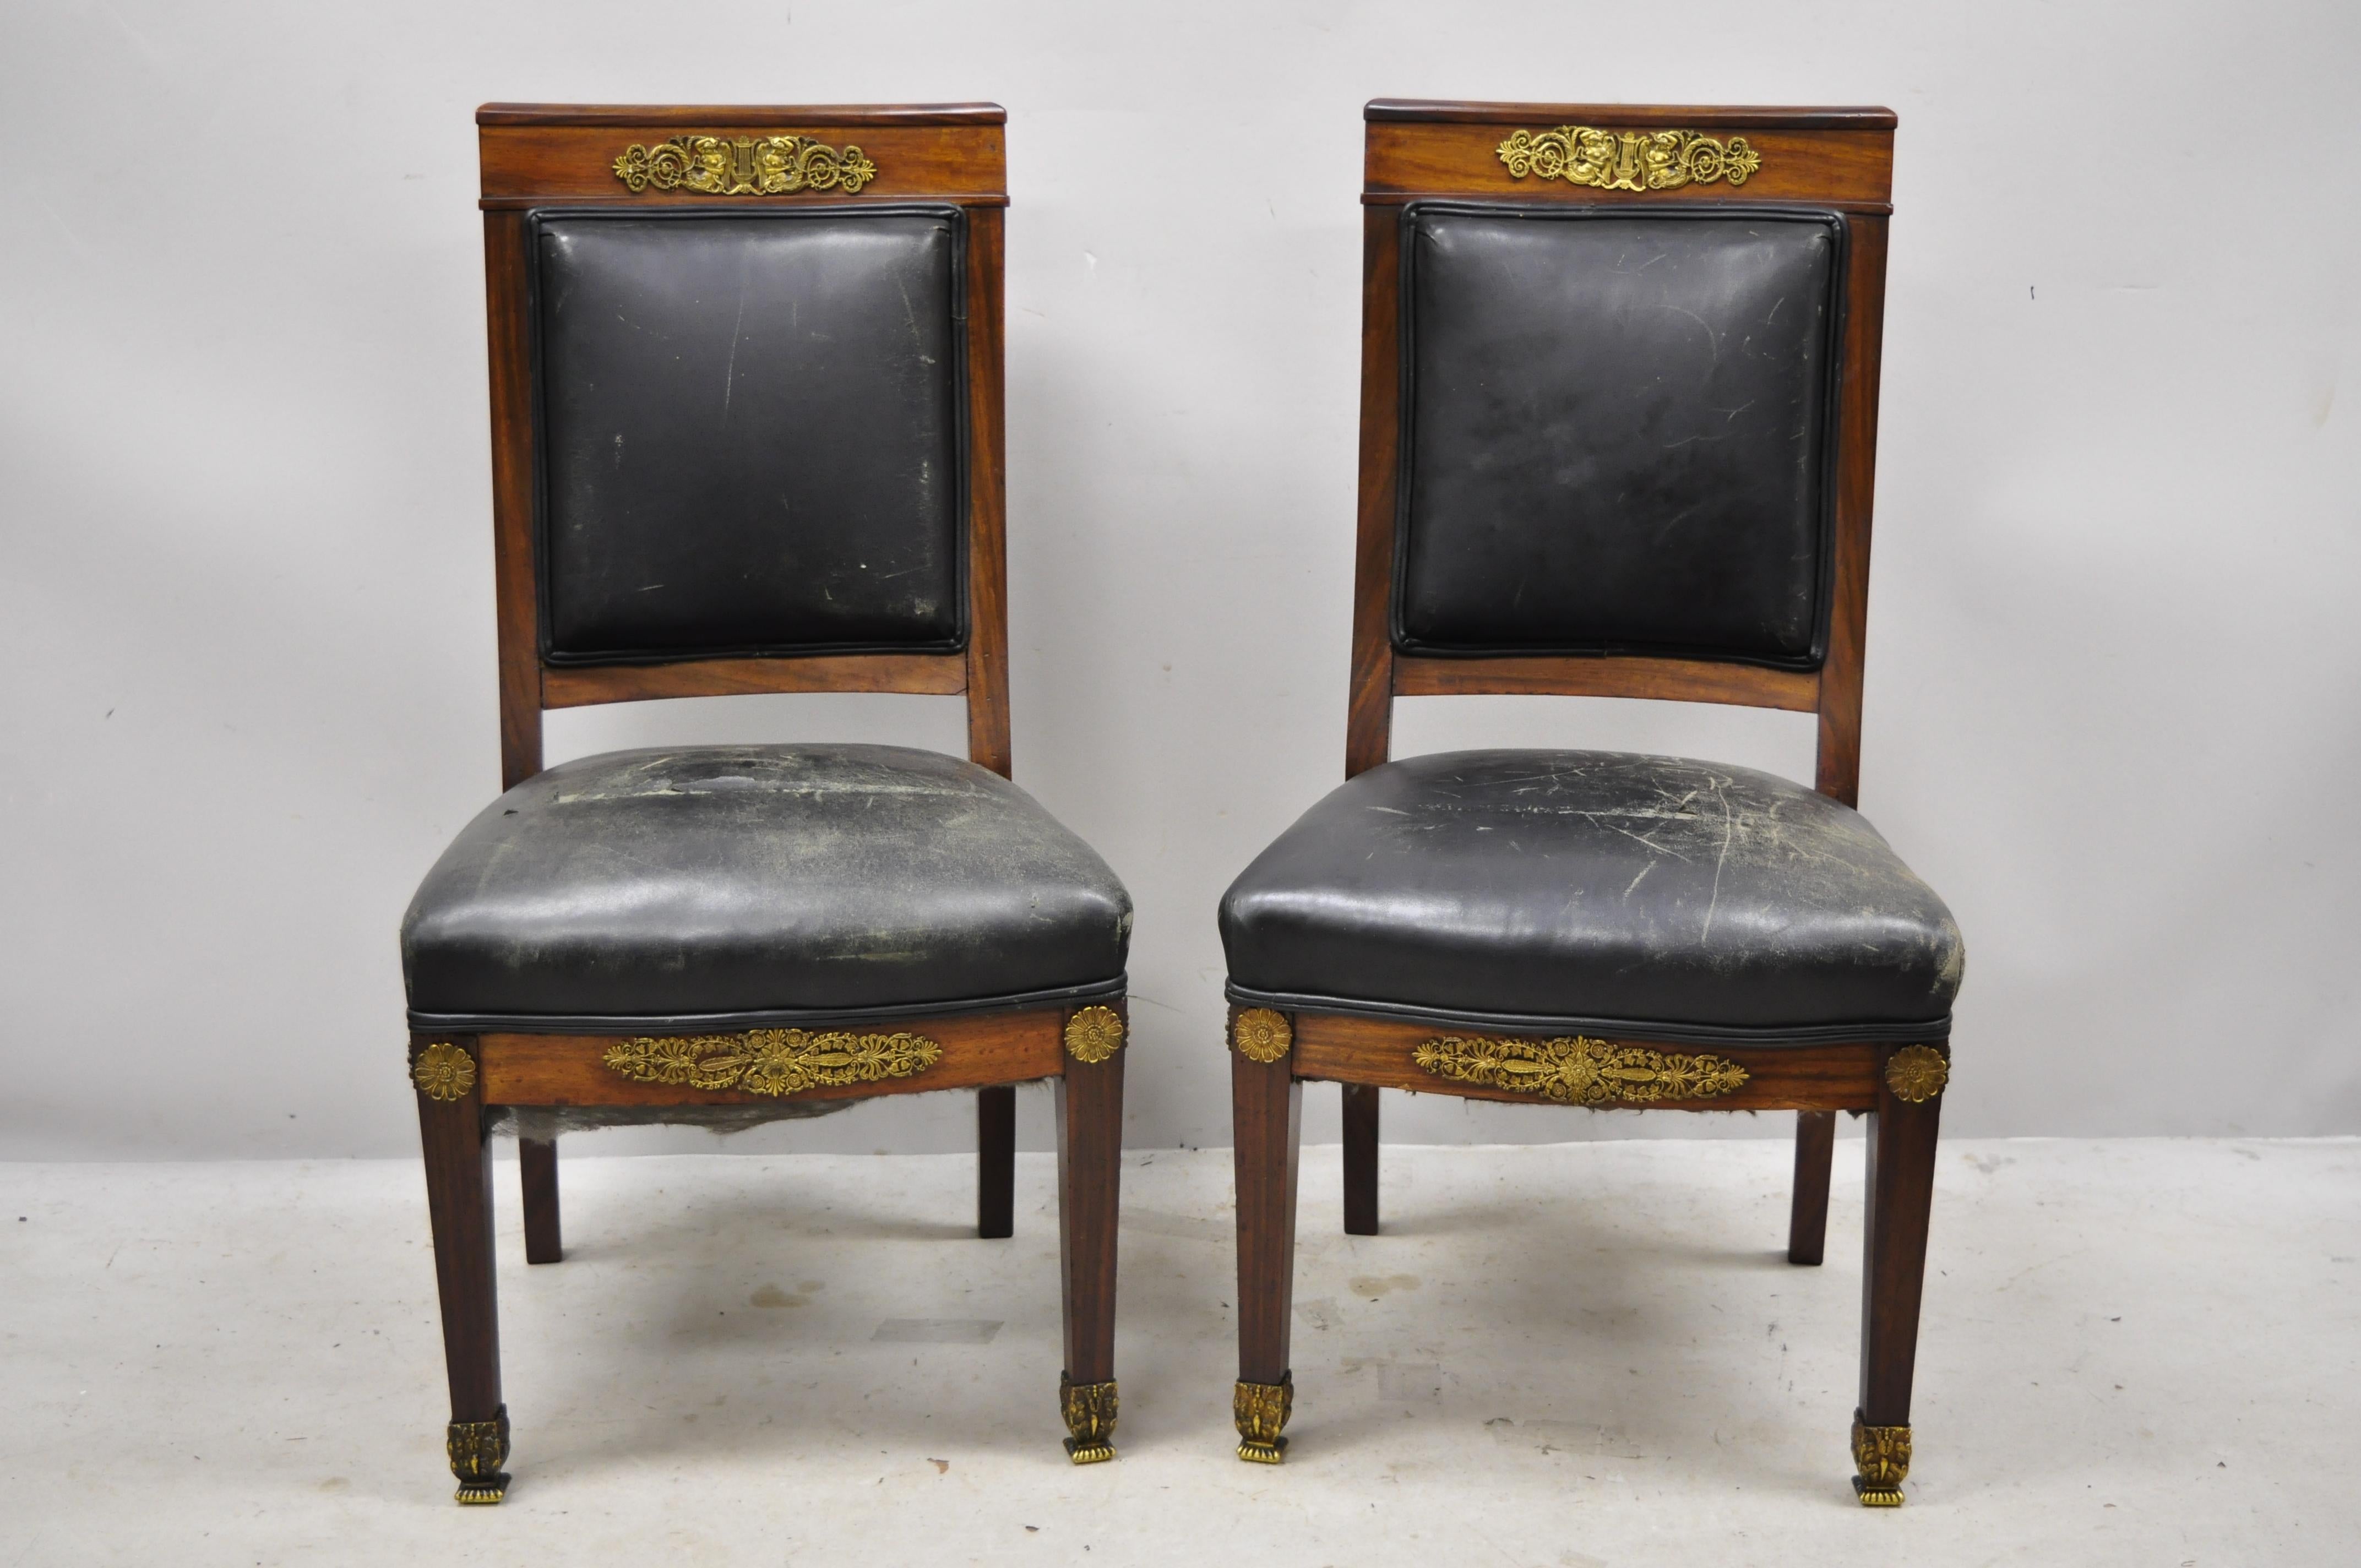 Antique French Empire solid mahogany Regency side chairs with figural bronze ormolu - a pair. Item features finely cast ornate bronze ormolu, slightly curved backrest, solid wood frames, beautiful wood grain, very nice antique pair, quality French